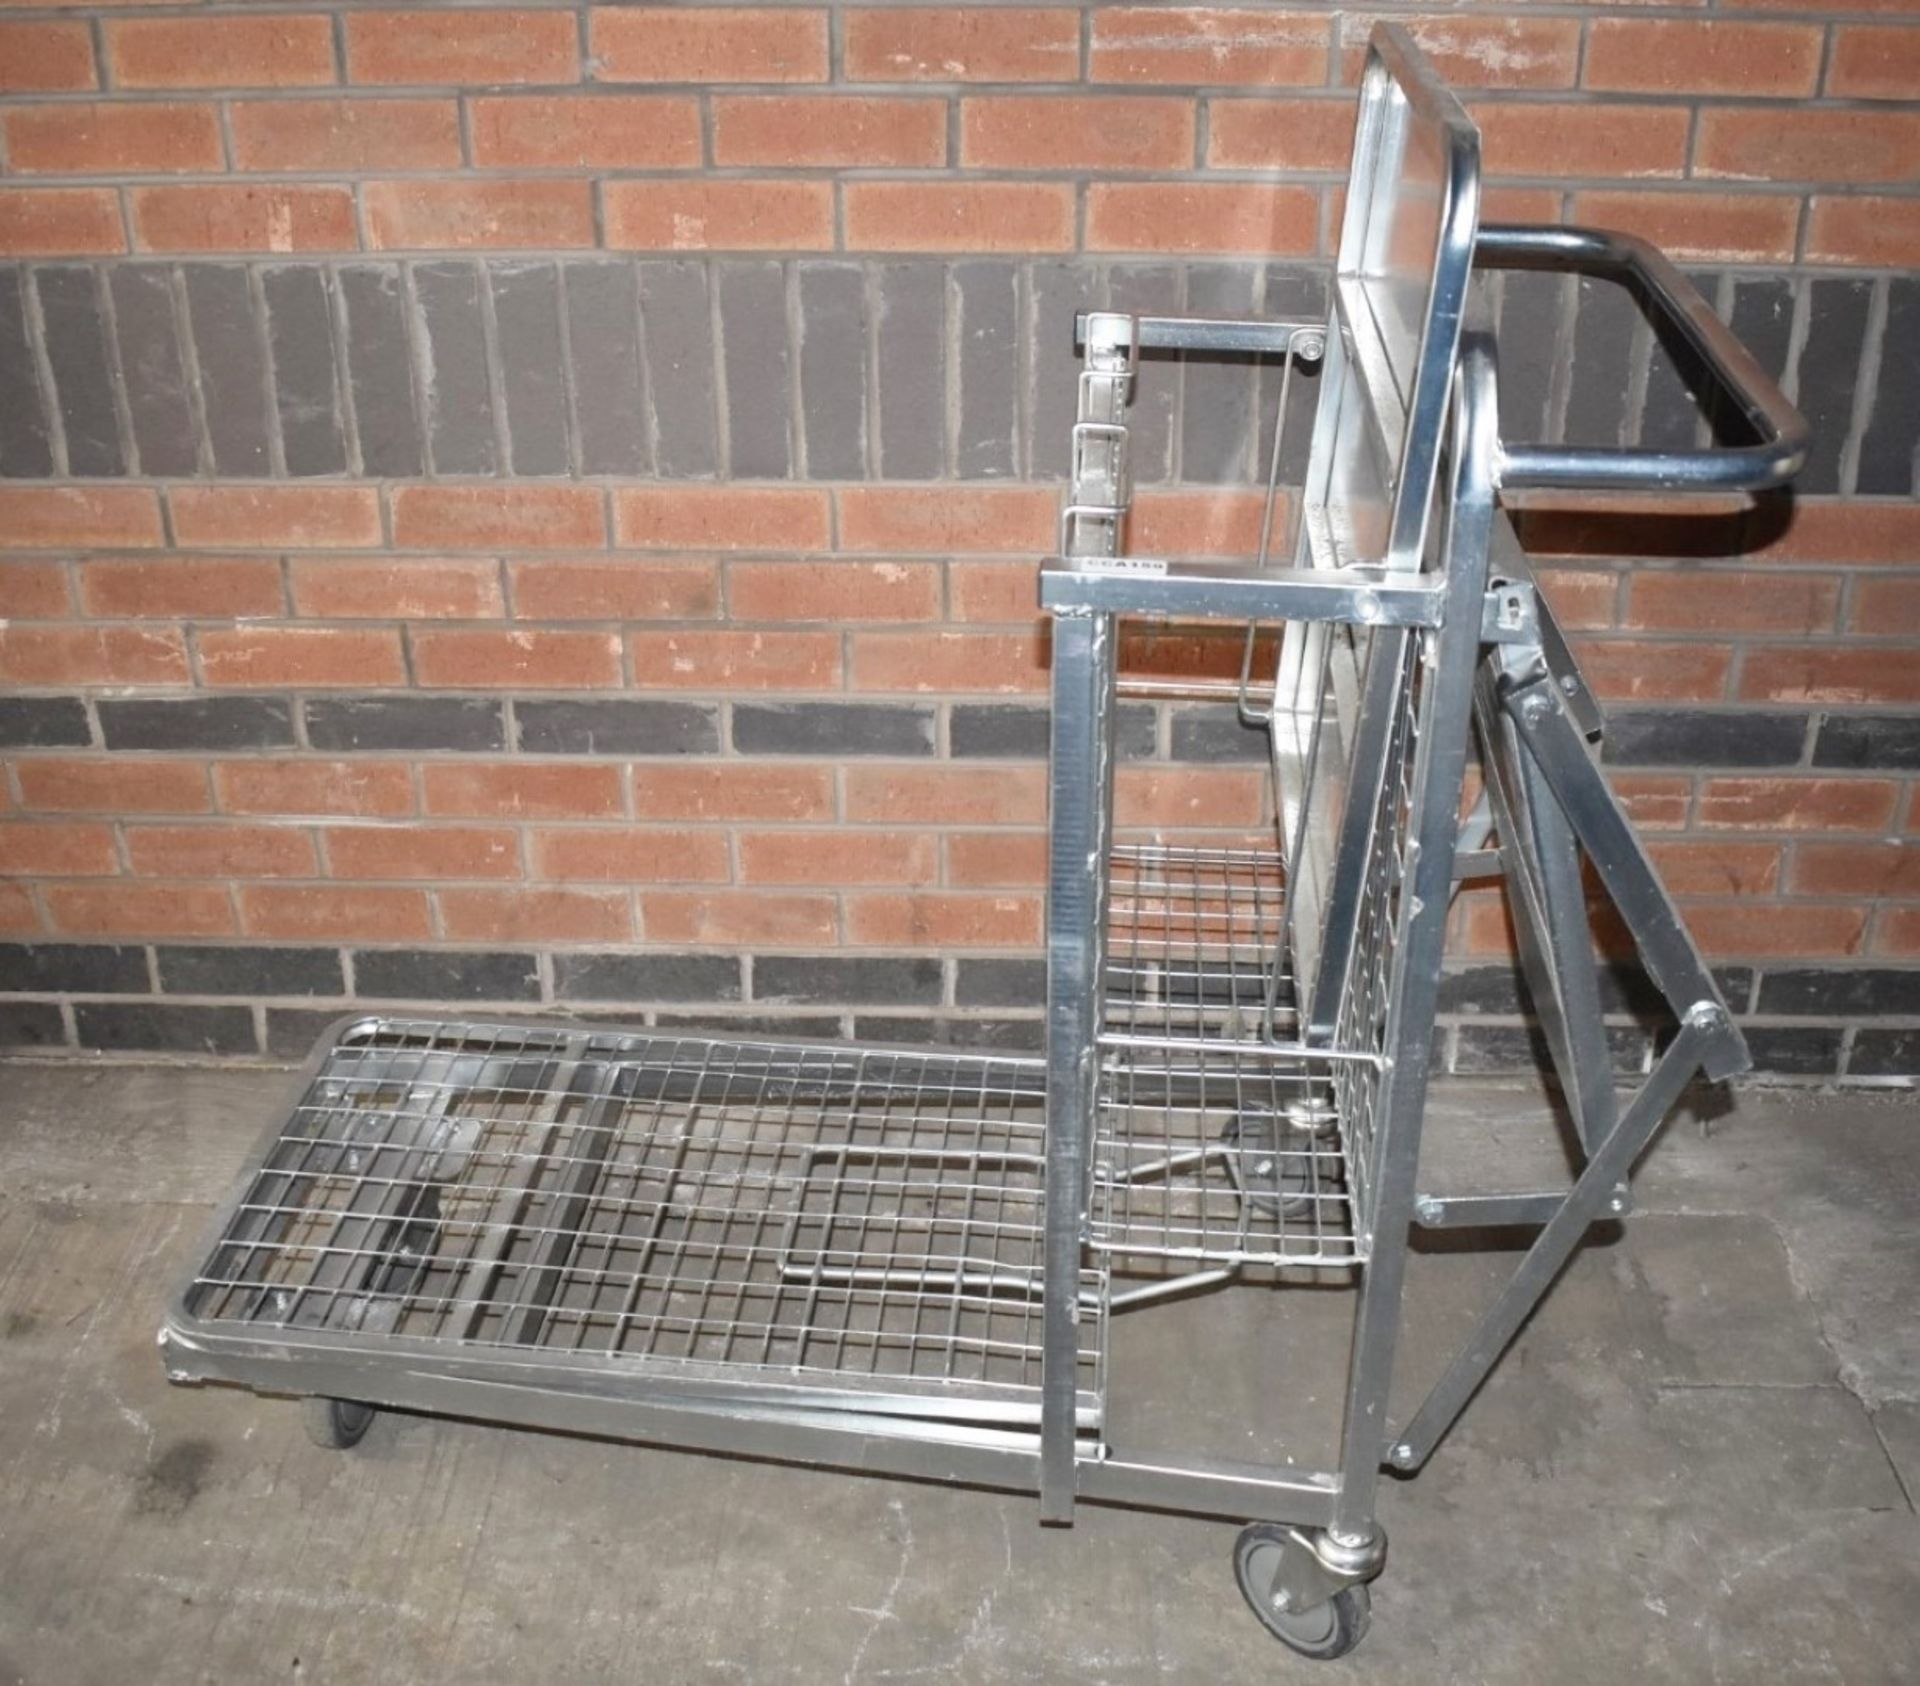 1 x Supermarket Retail Merchandising Trolley With Pull Out Step and Folding Shelf - Dimensions: - Image 5 of 12